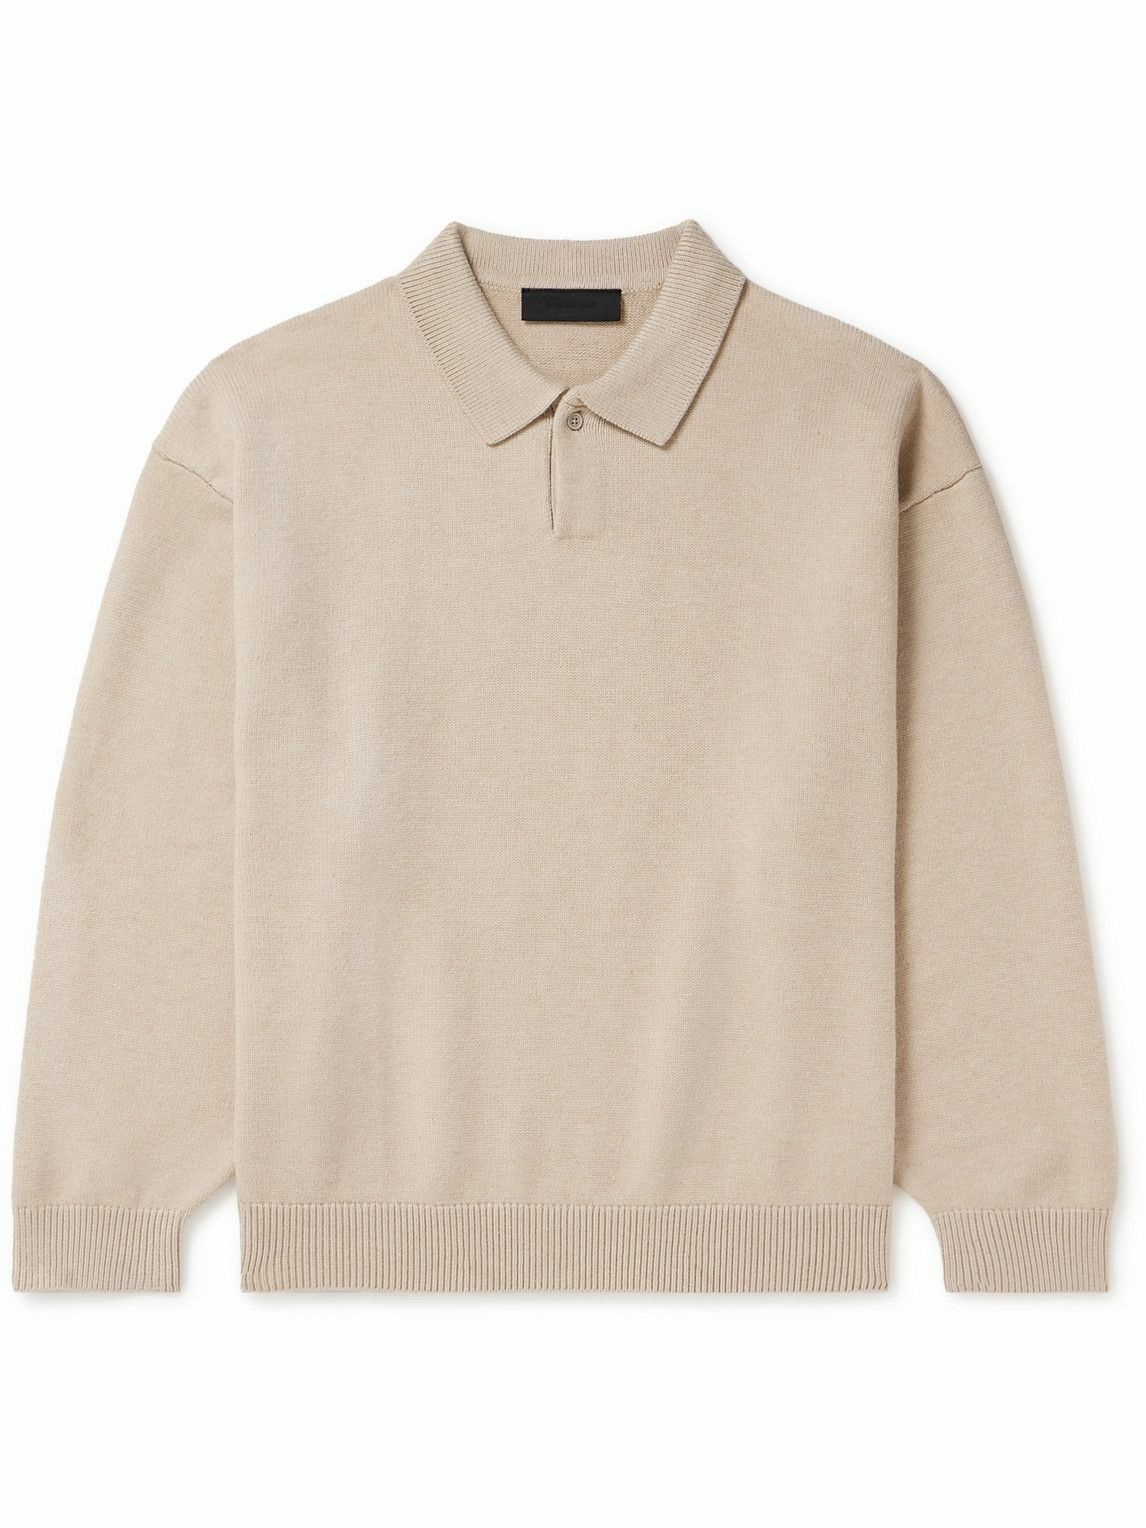 FEAR OF GOD ESSENTIALS - Oversized Knitted Polo Sweater - Neutrals Fear ...